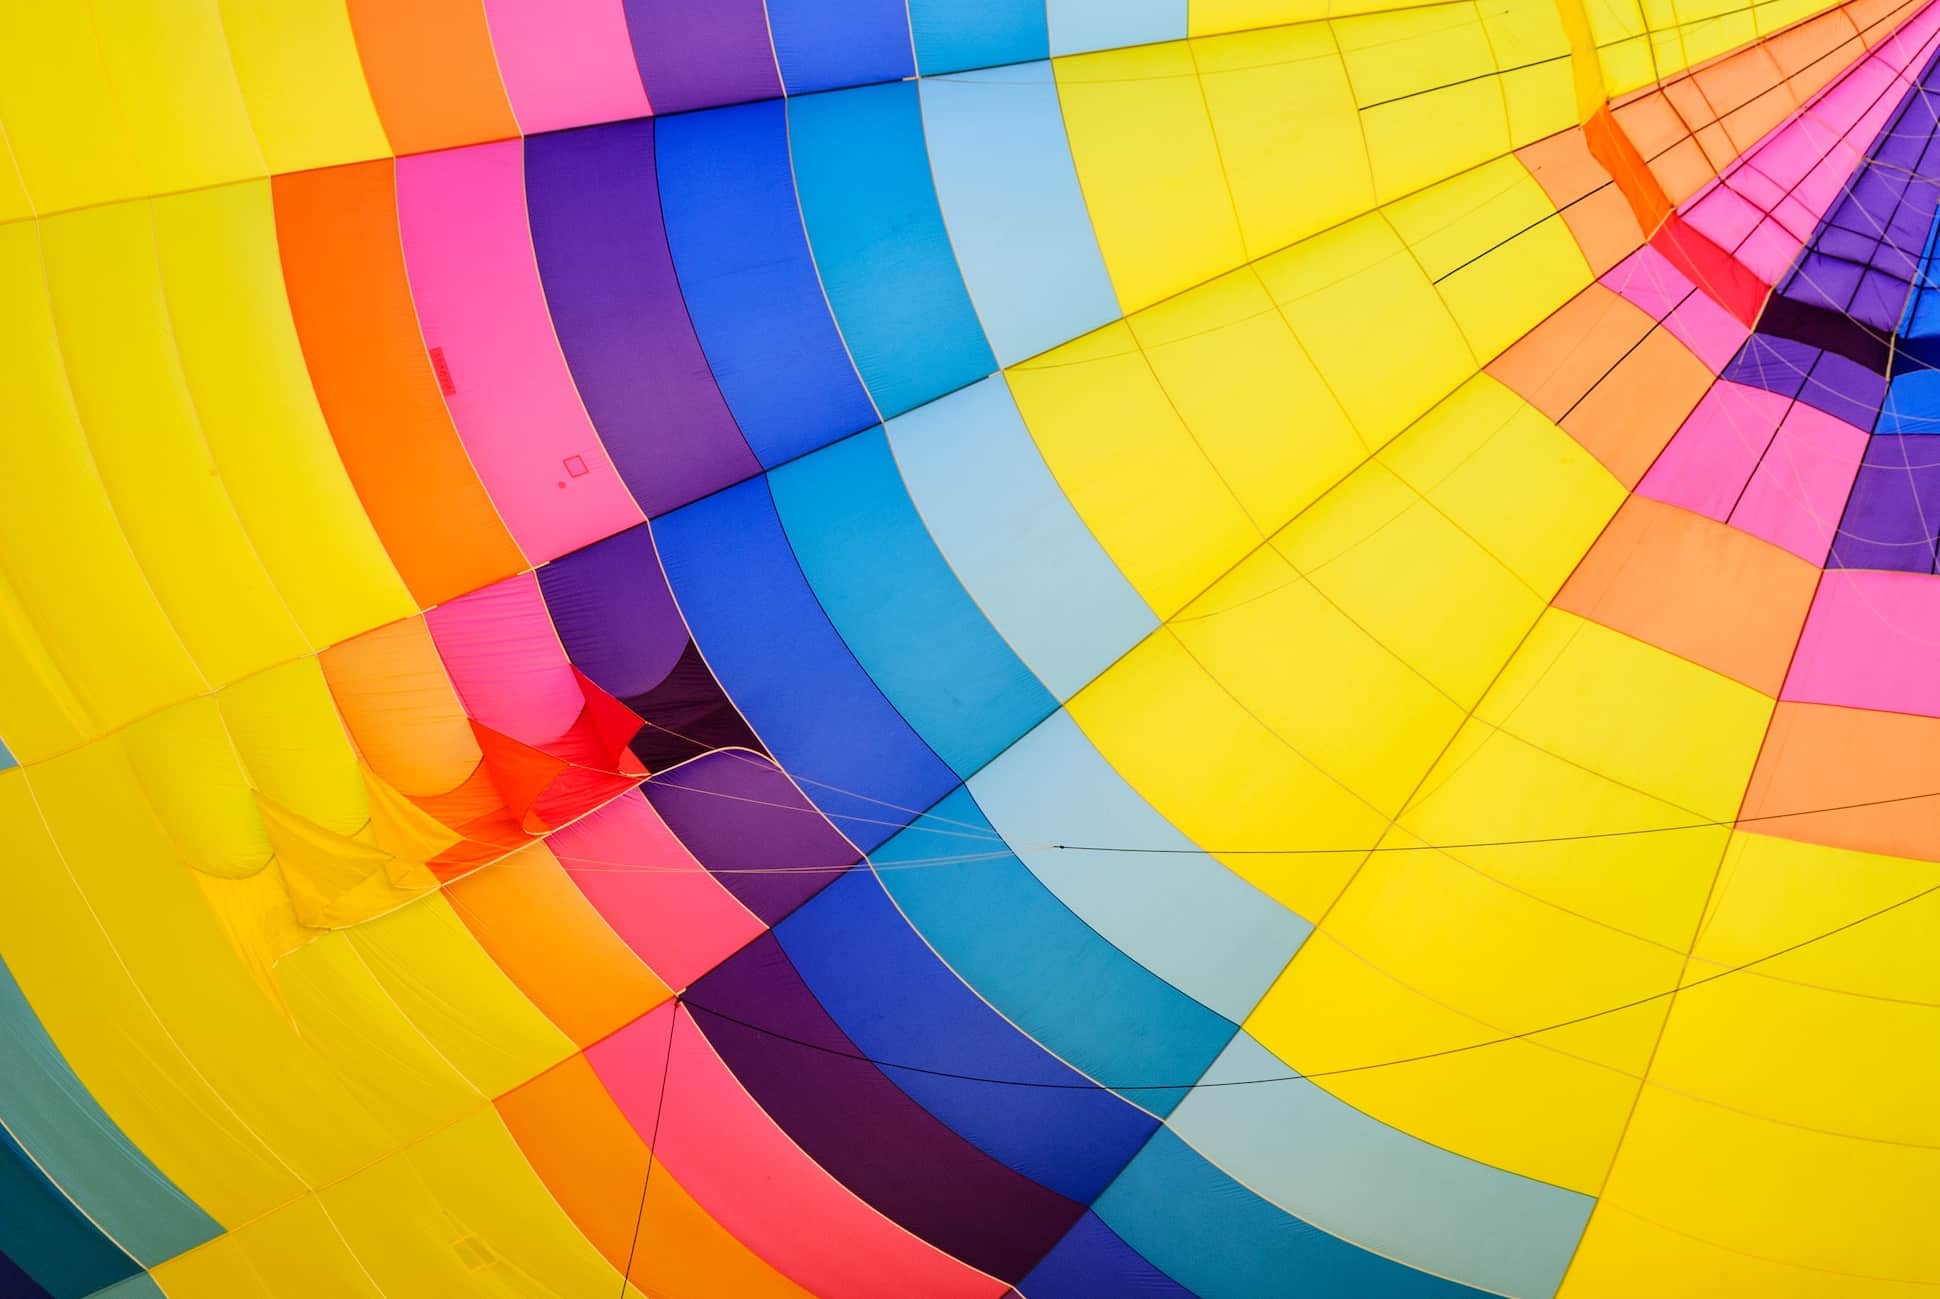 Image of hot air balloon by Pexels for Pixabay